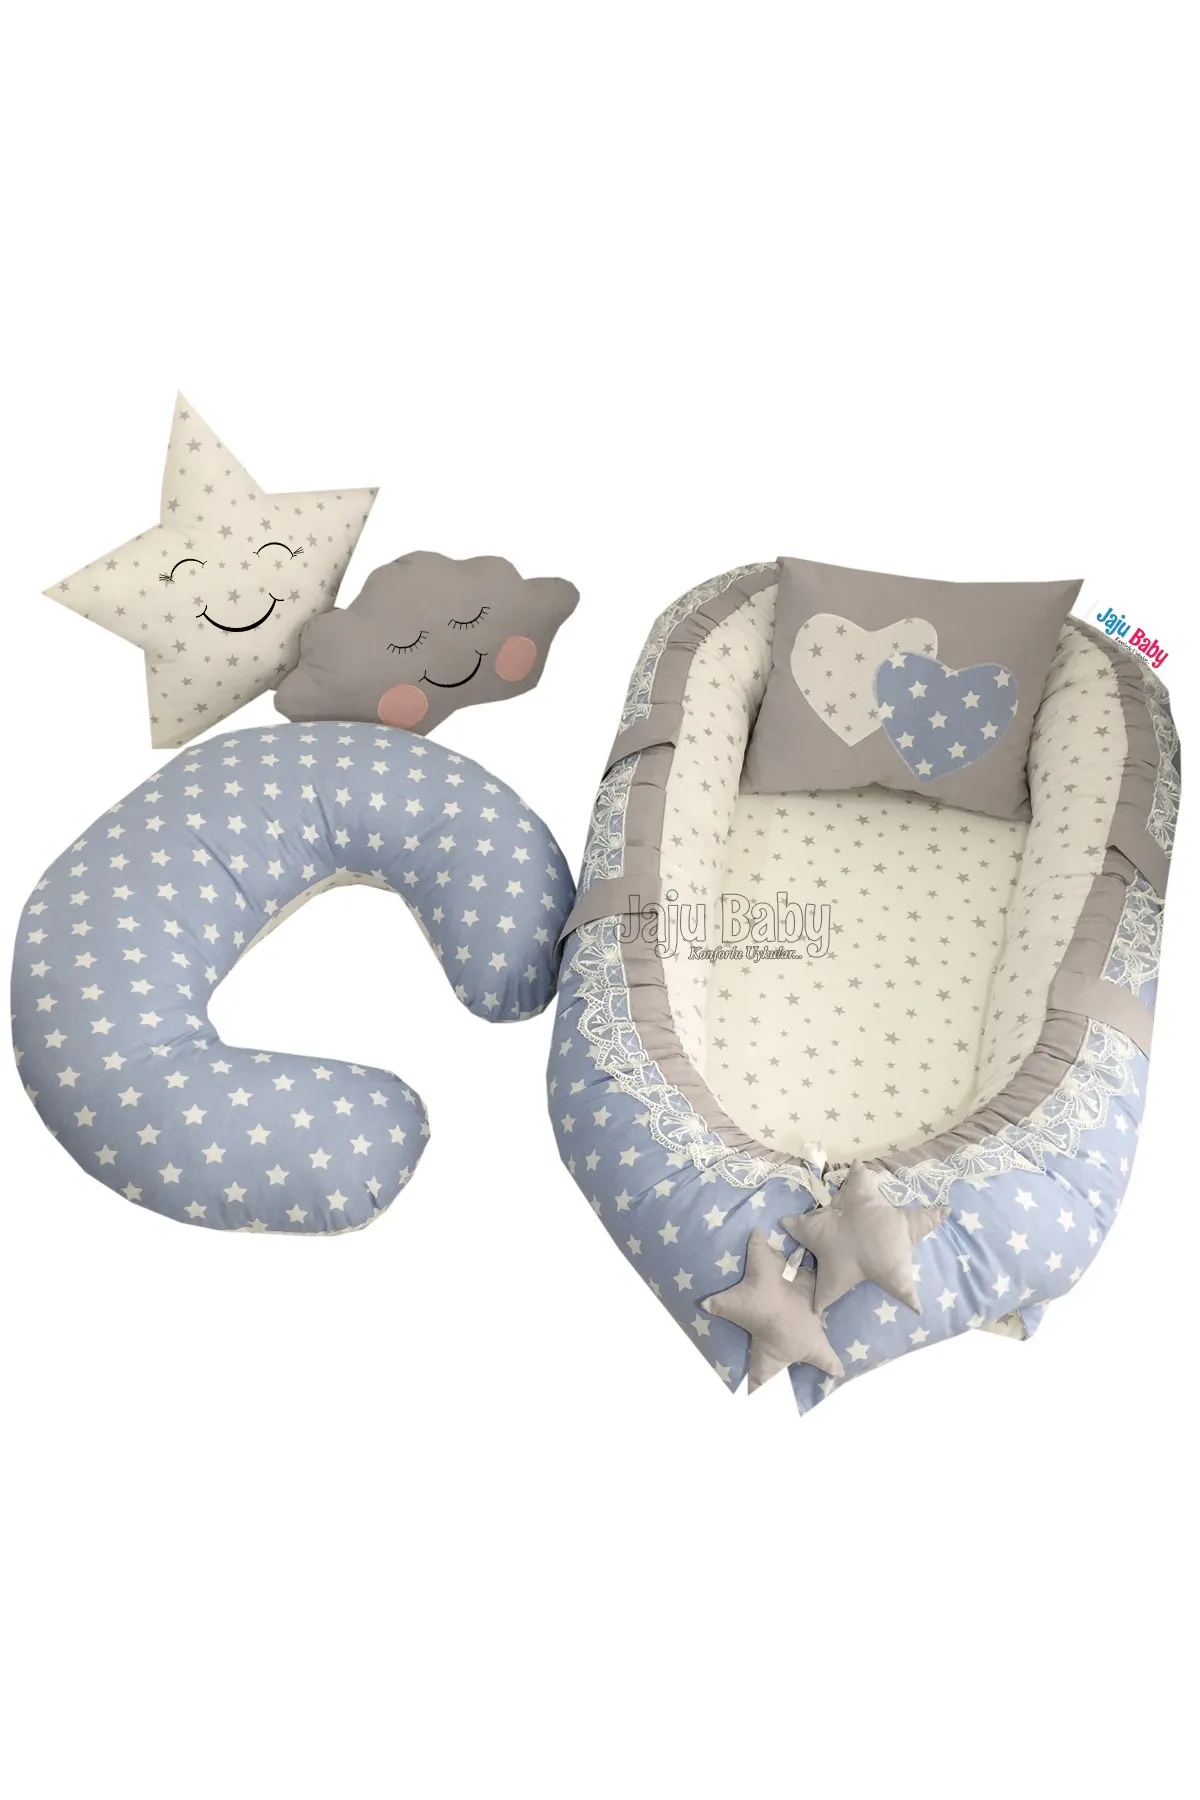 Jaju Baby Handmade Blue Star Gray Fabric Lux Design Babynest and Breastfeeding Pillow Set of 5 Mother Side Portable Baby Bed